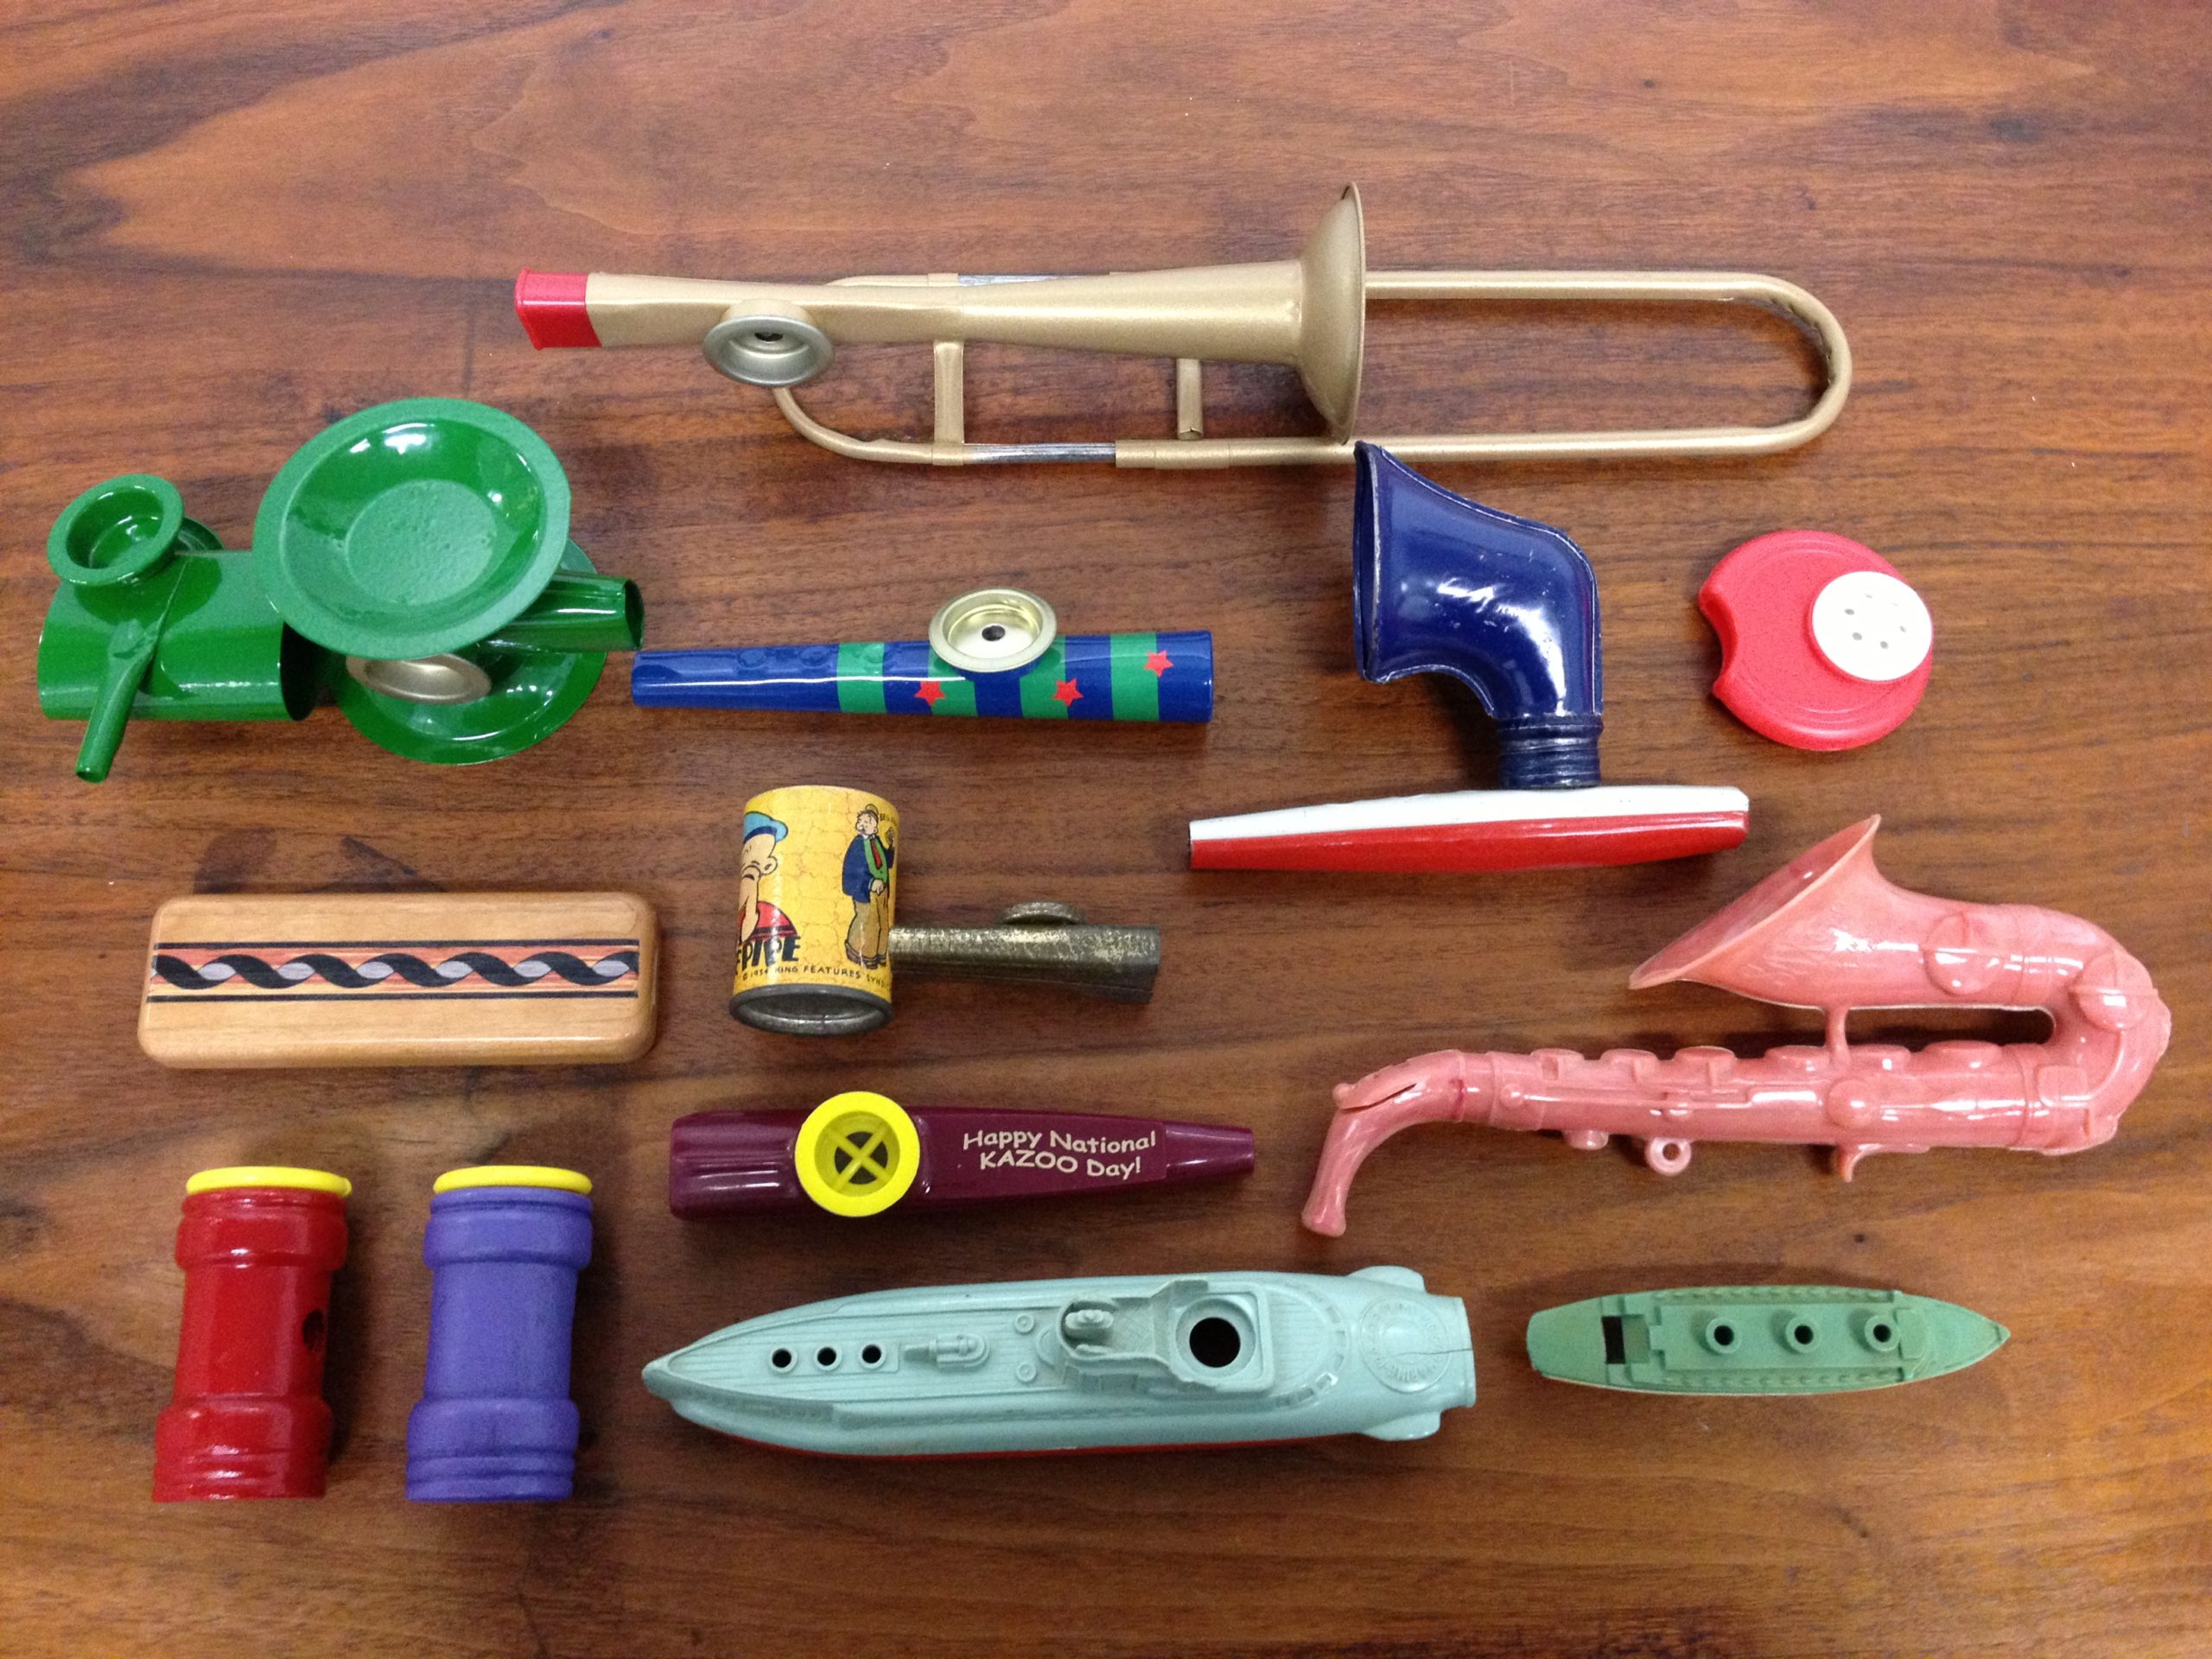 A variety of colorful plastic kazoos -- from common kazoo shapes to a pink saxophone shape to submarine/military ship shapes, to a trombone shape.